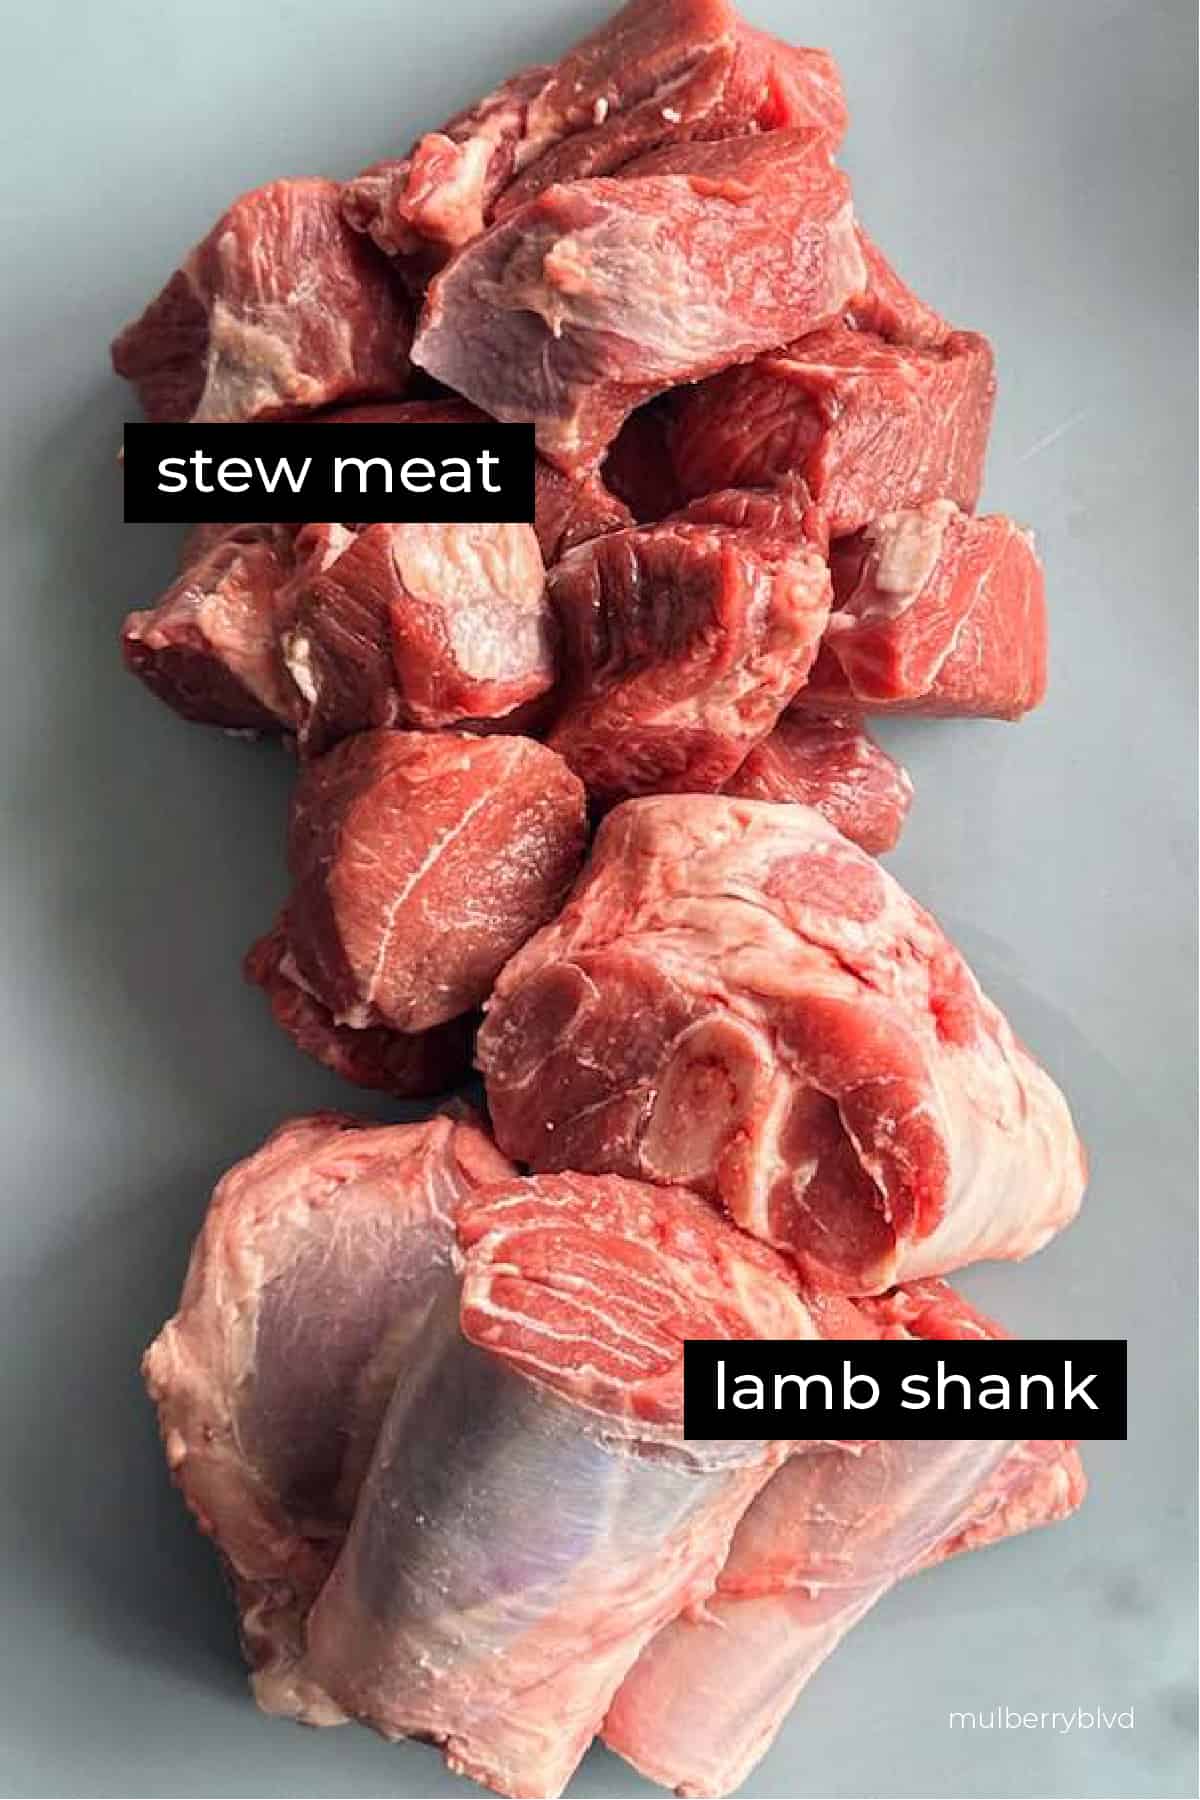 Stew meat and lamb shanks